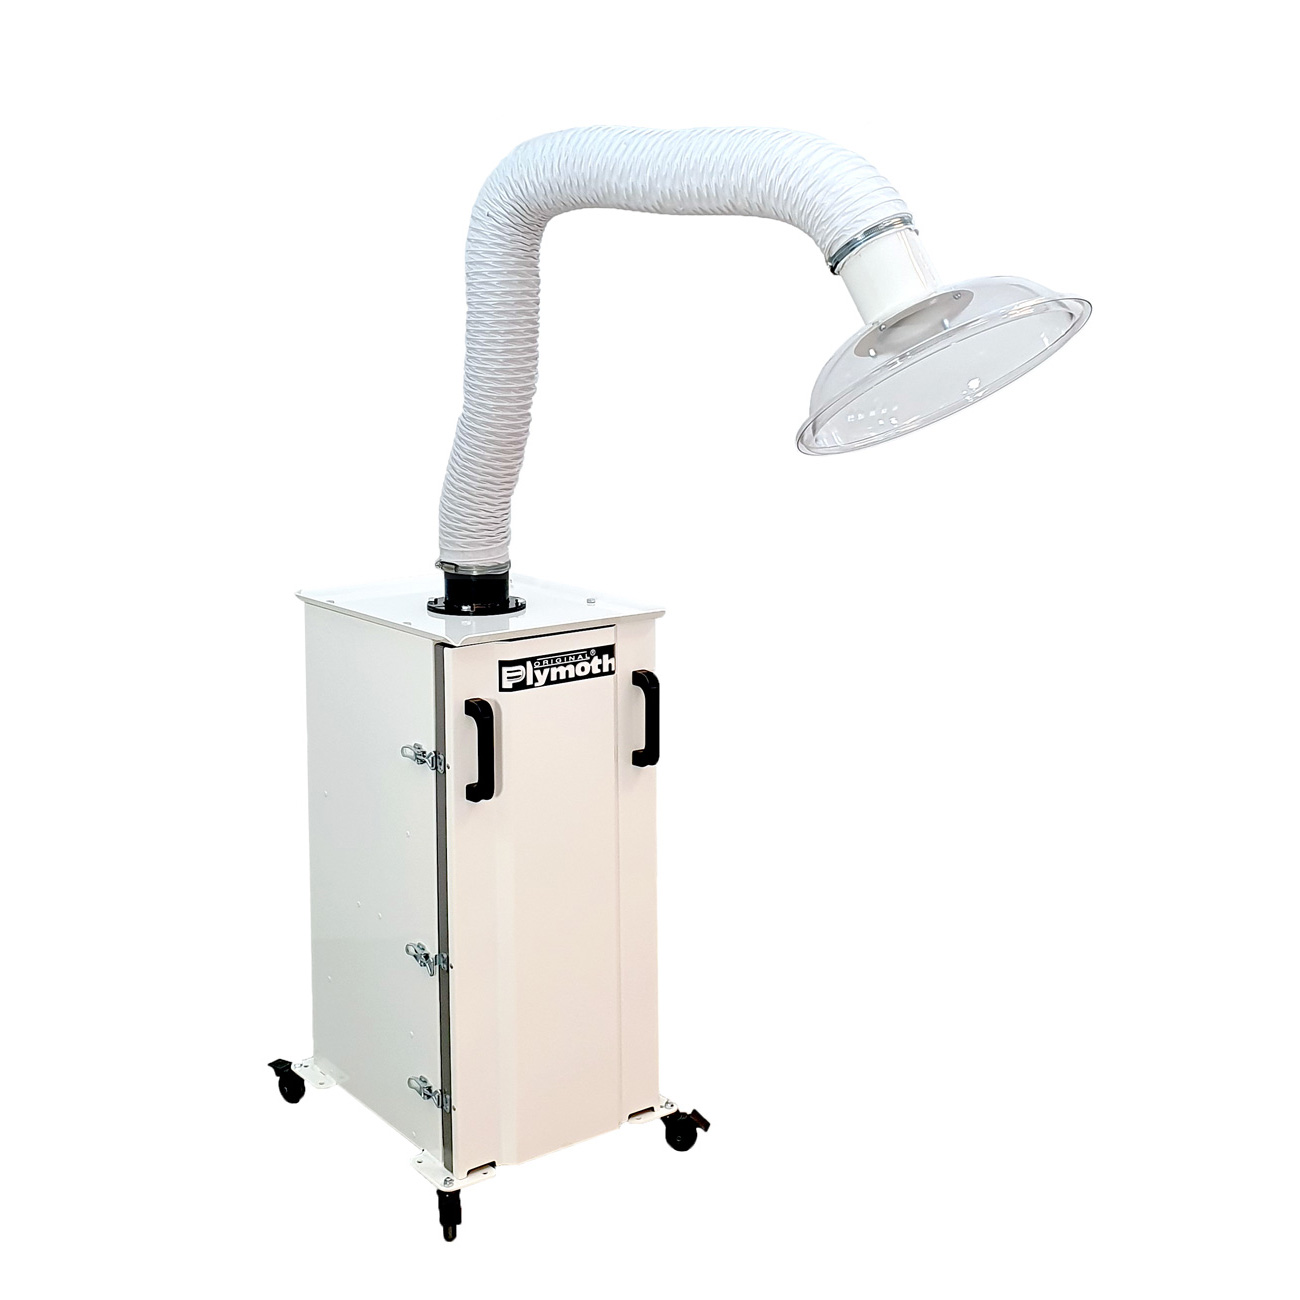 Denta-Flex 400 Extractor Filter with Extraction Arm